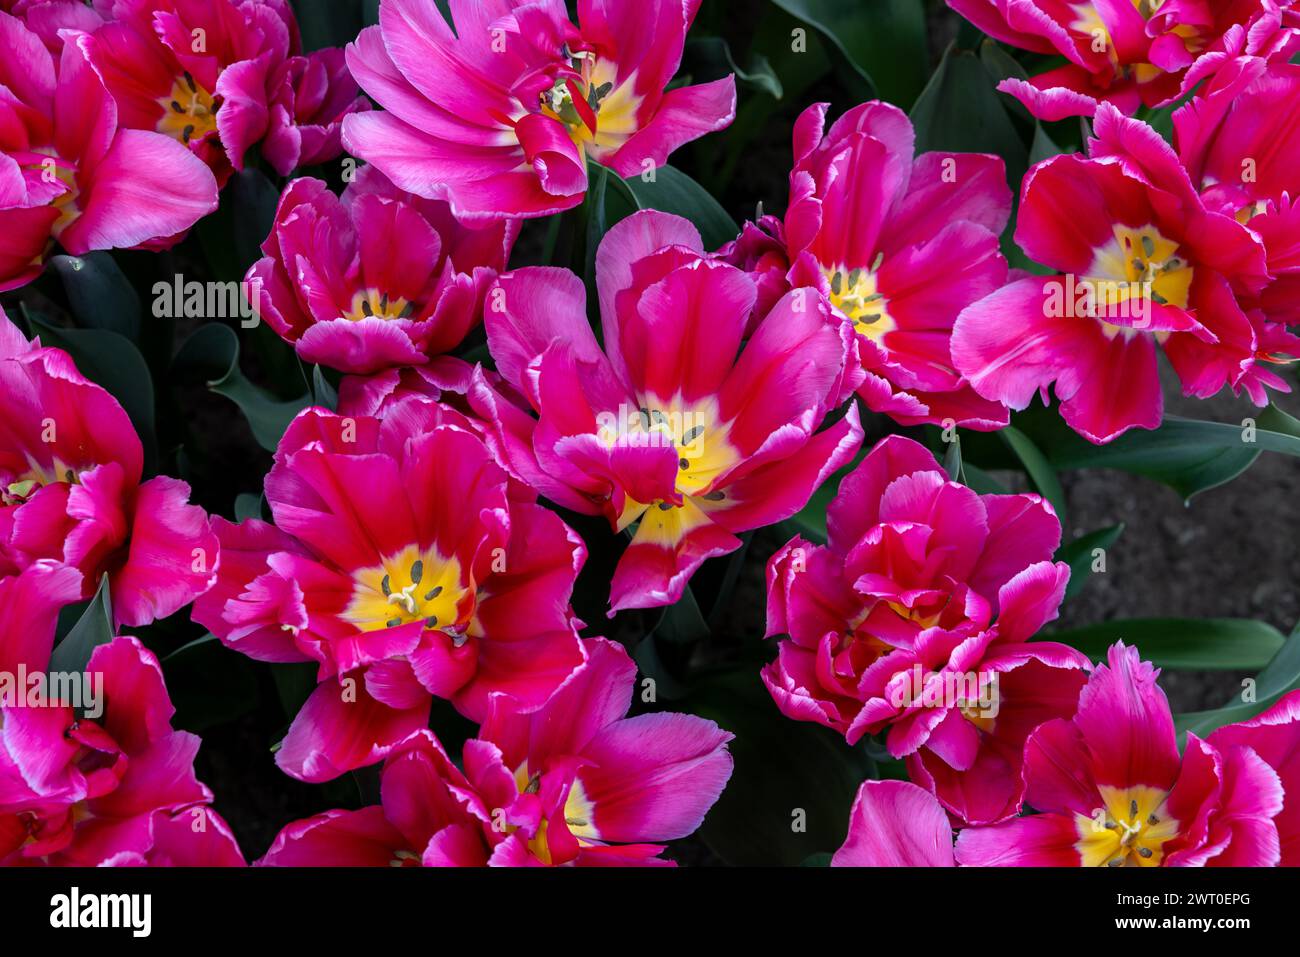 Red tulip called Supri Candy, Triumph group. Tulips are divided into groups that are defined by their flower features Stock Photo